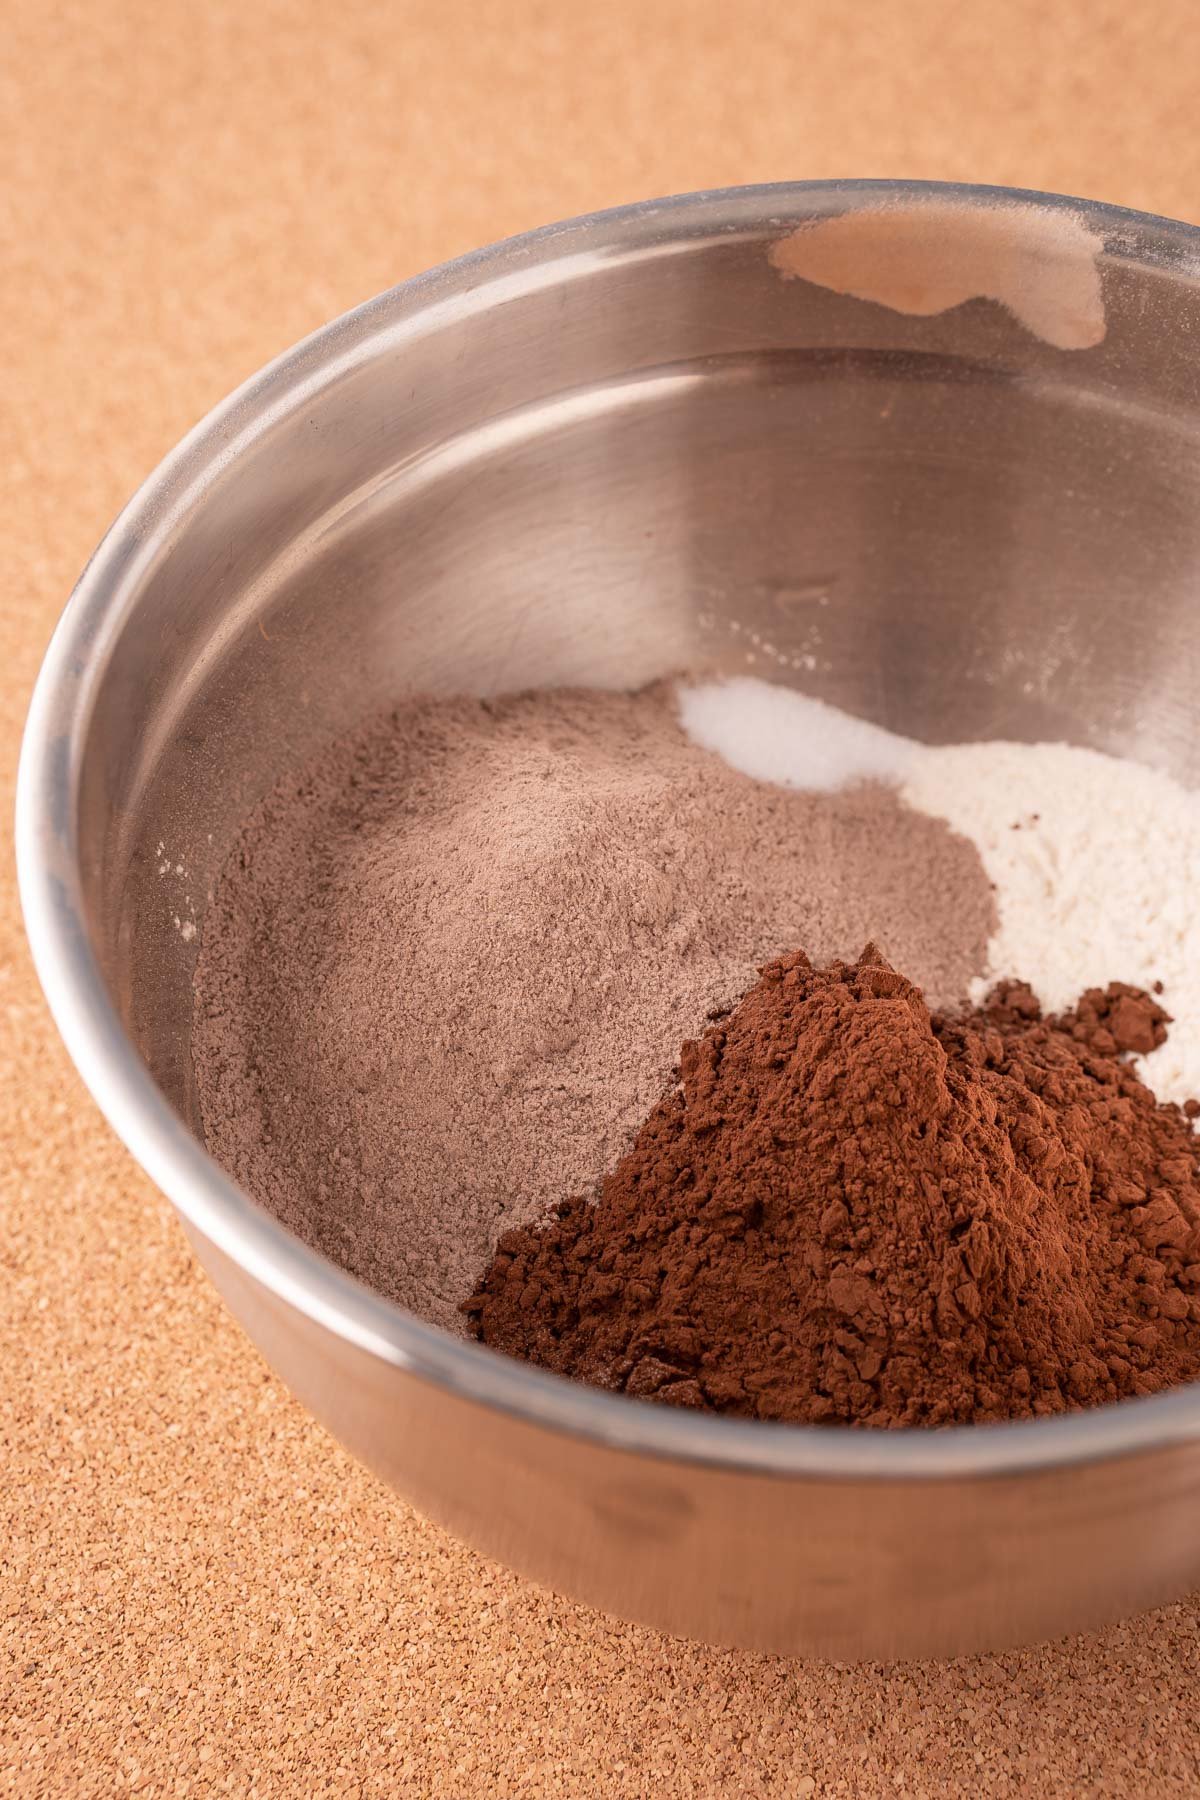 Flour, cocoa, and pudding mix in a metal mixing bowl.